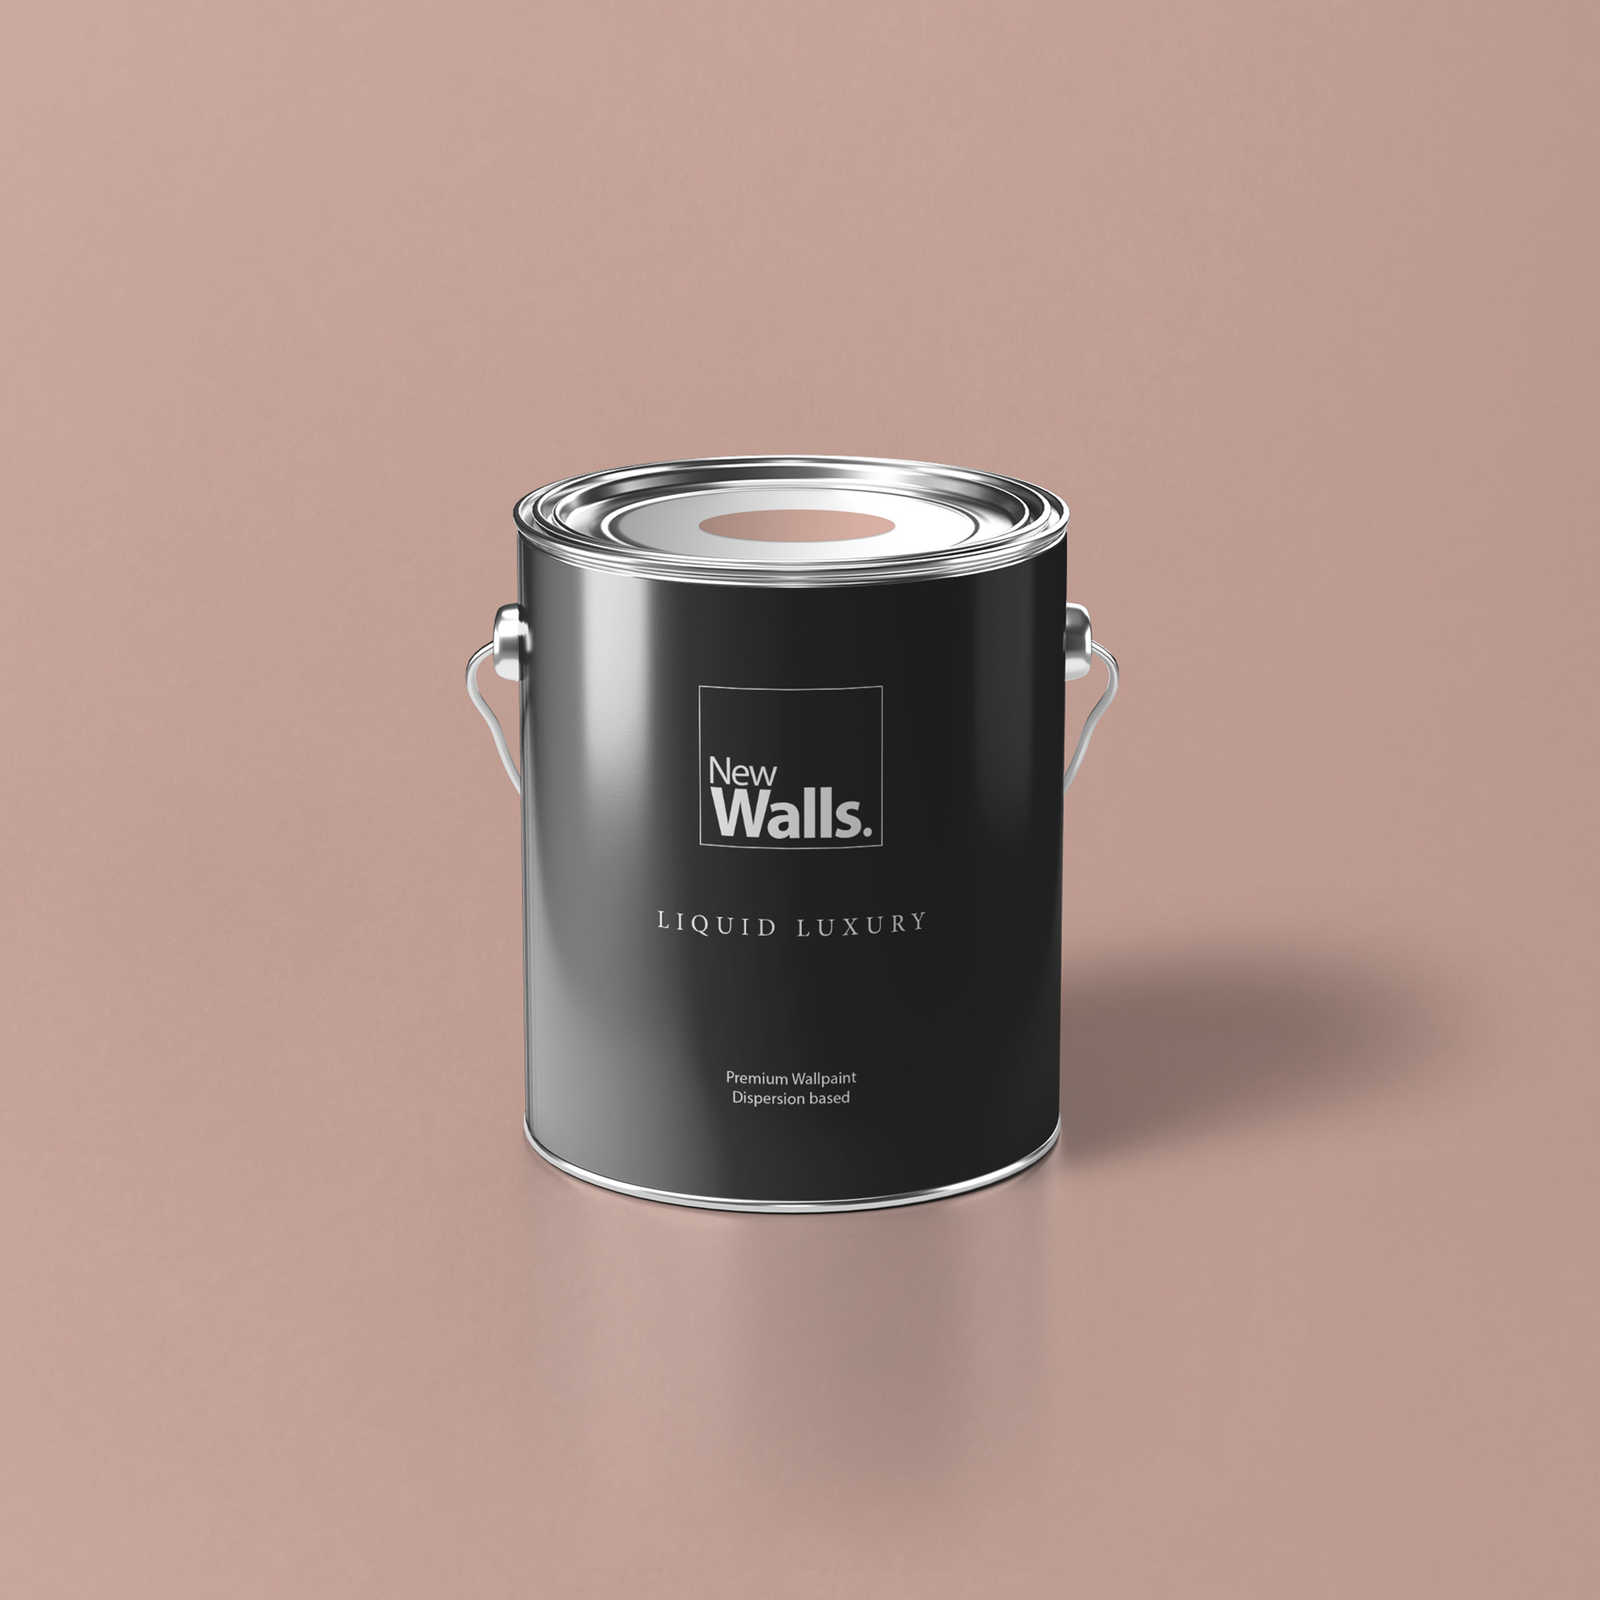 Premium Wall Paint Soft Salmon »Natural Nude« NW1009 – 2.5 litre
